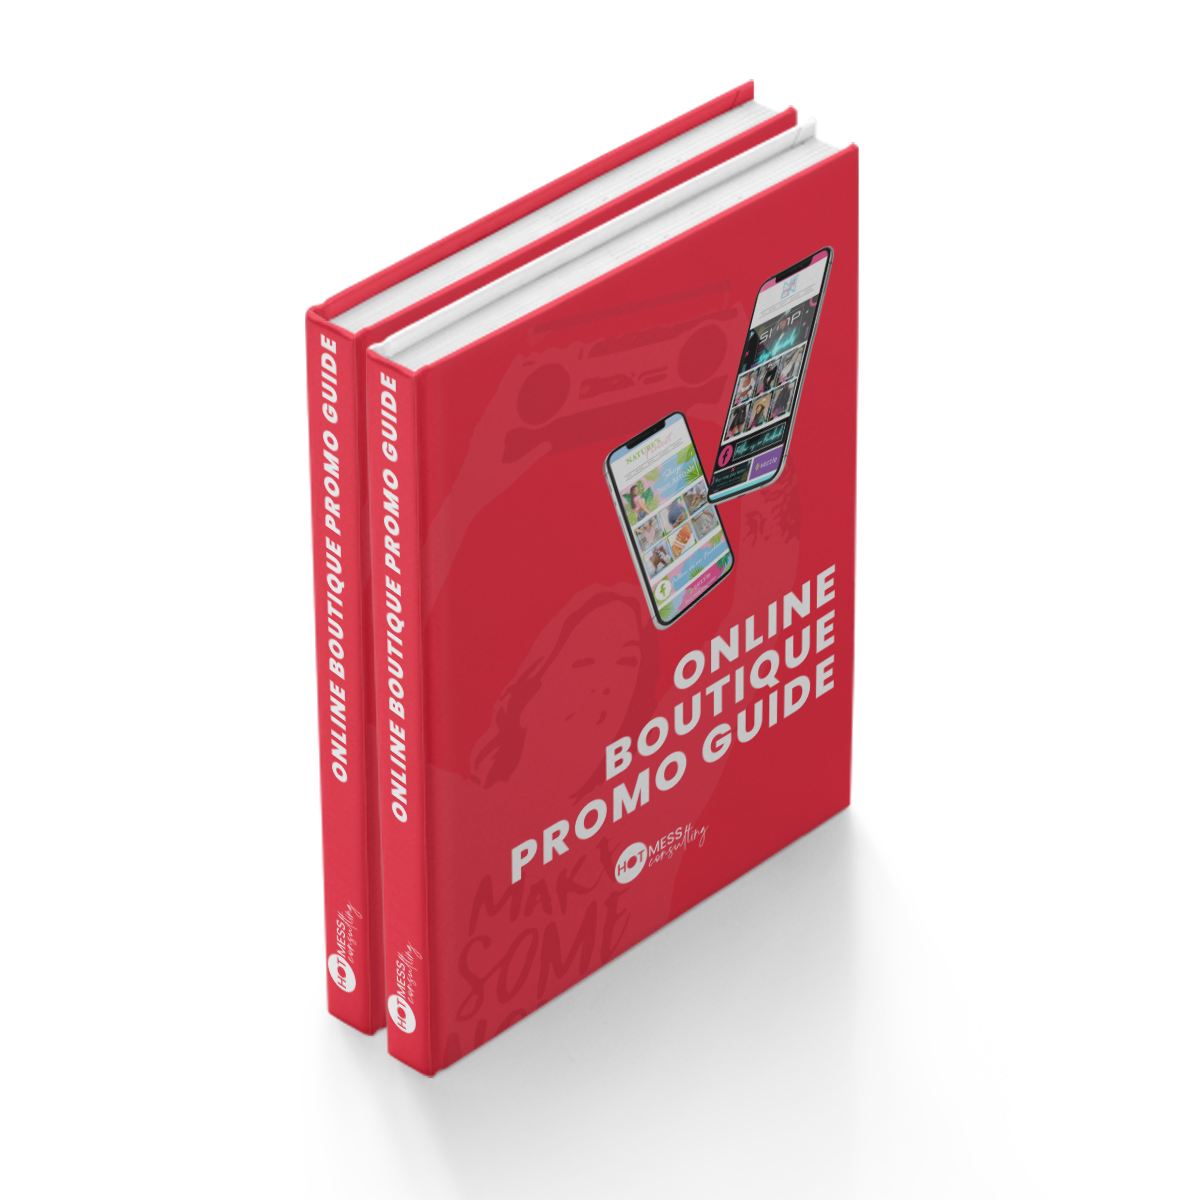 Online Boutique Promo Guide (Subscribers Only Rate)